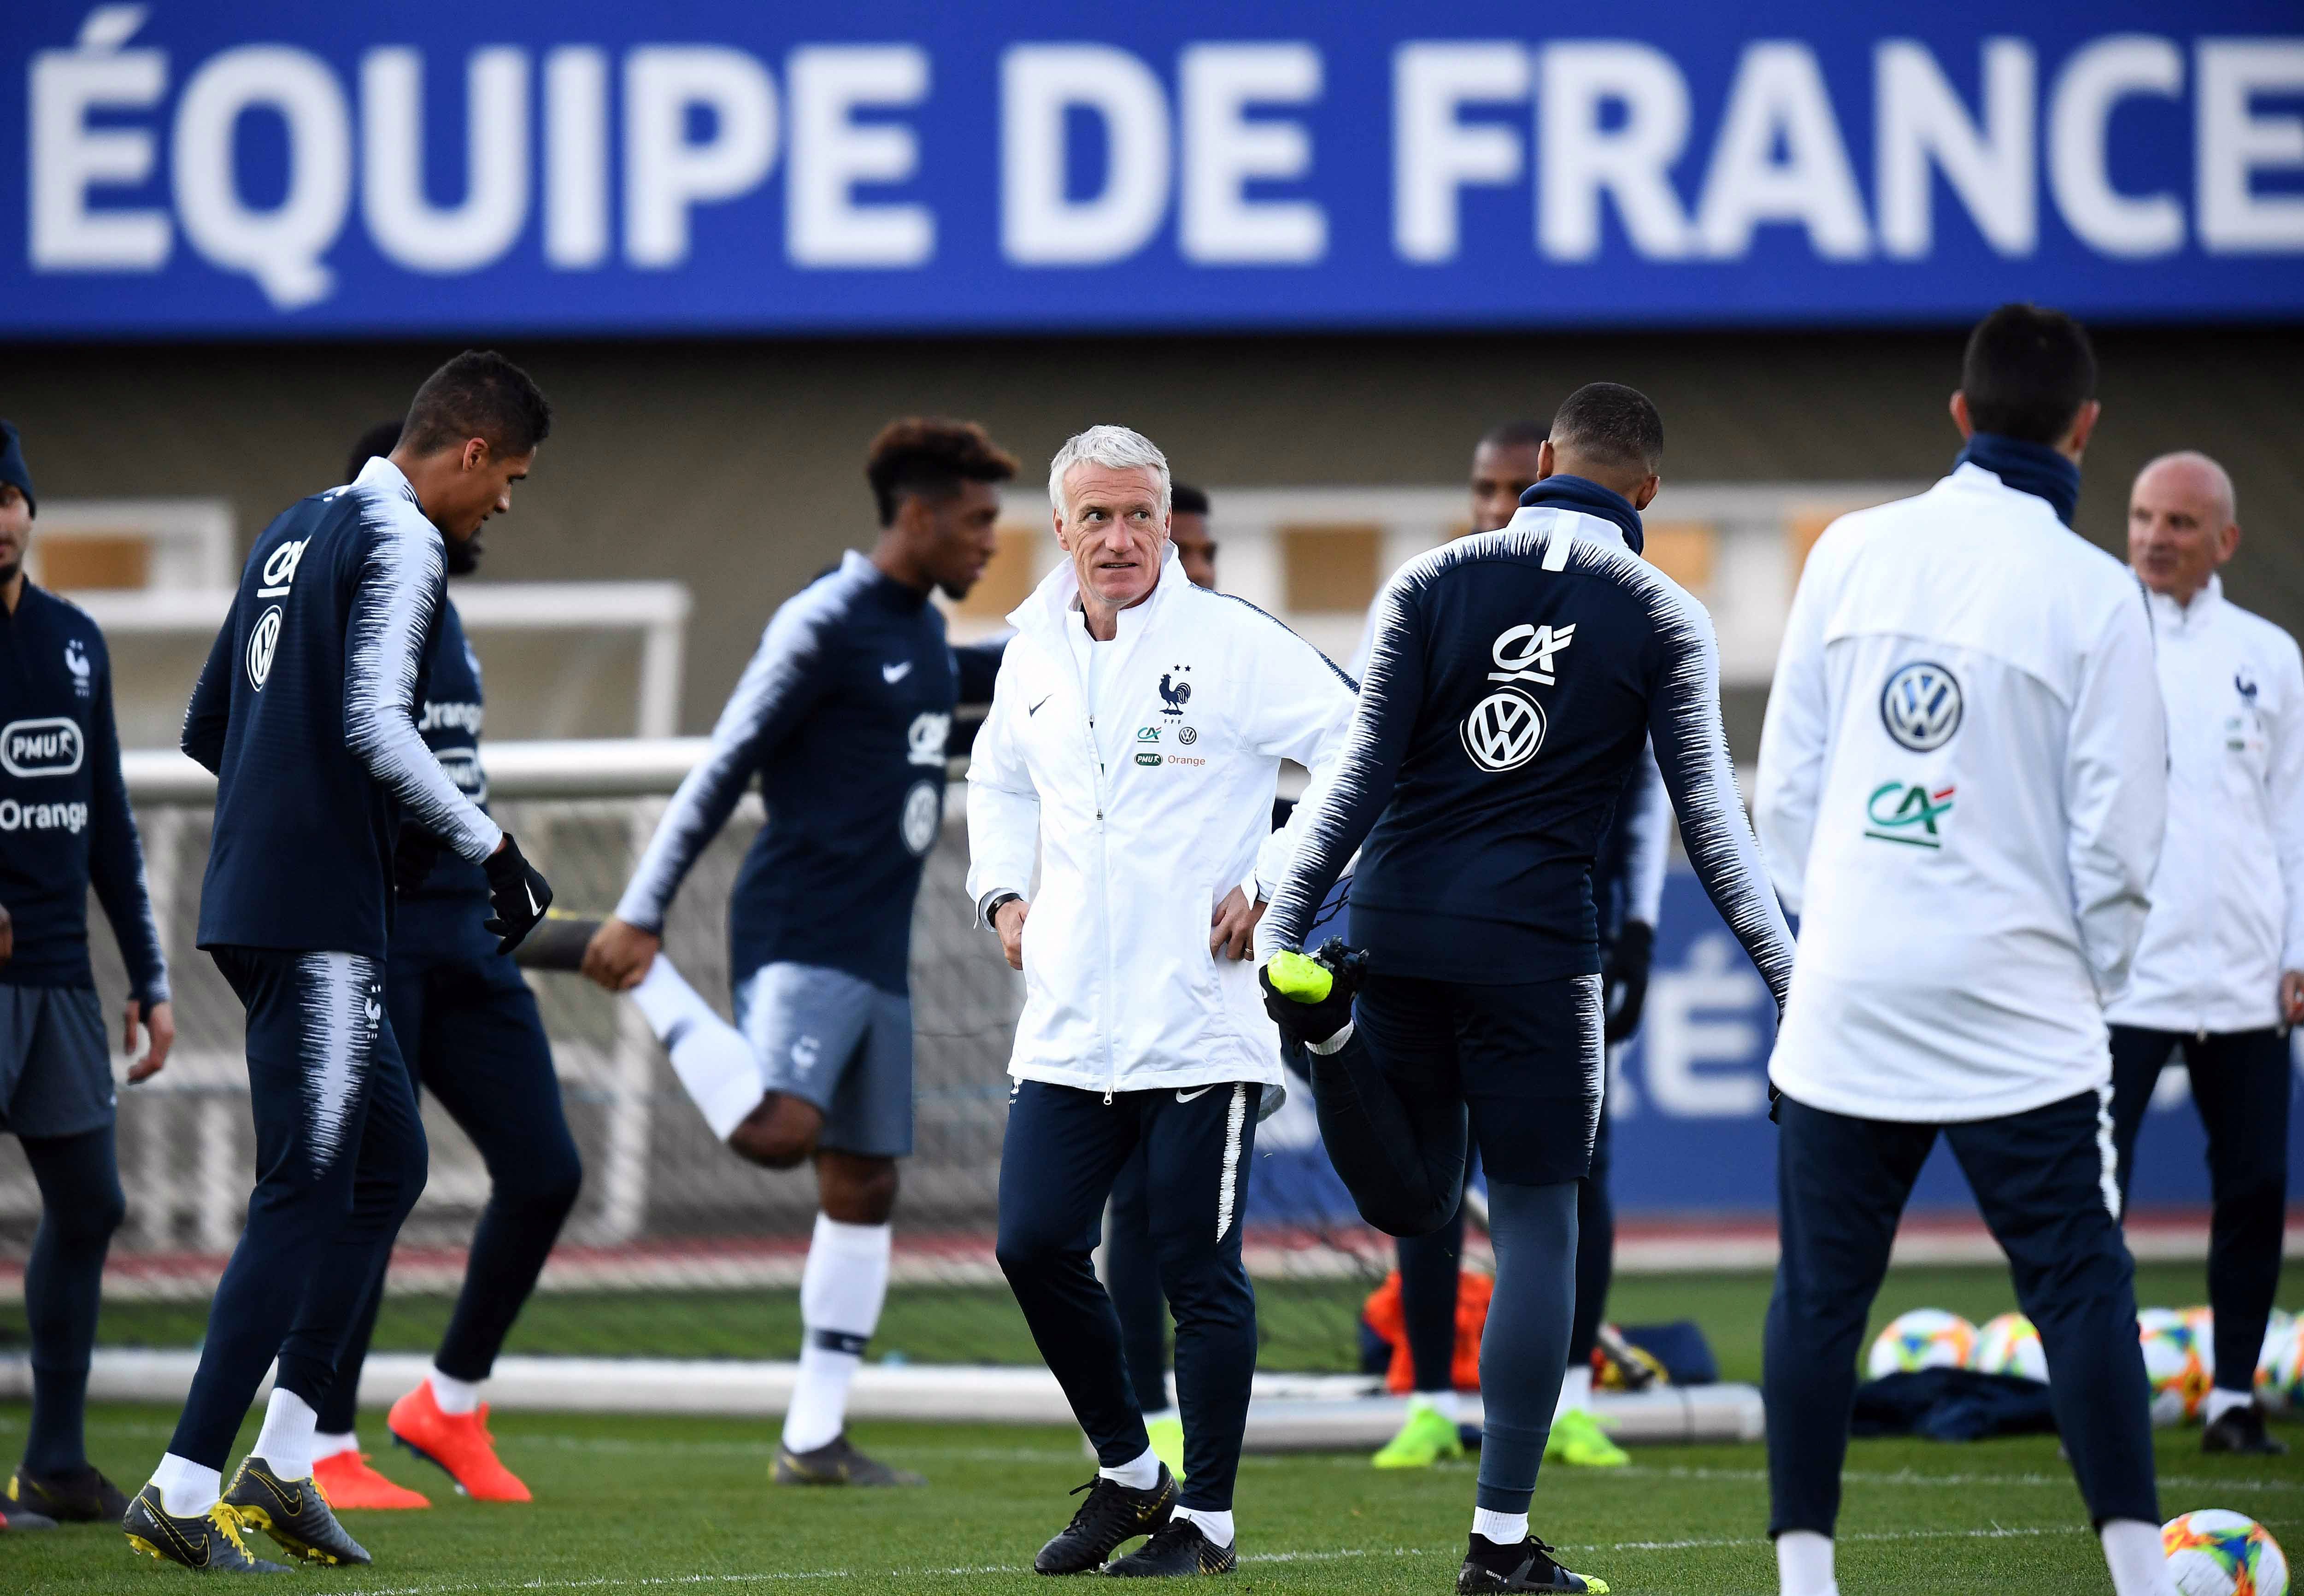 France's head coach Didier Deschamps attends a training session in Clairefontaine-en-Yvelines on March 19, 2019, as part of the team's preparation for their upcoming Euro 2020 qualification football matches against Moldova and Iceland. (Photo by FRANCK FIFE / AFP)        (Photo credit should read FRANCK FIFE/AFP/Getty Images)